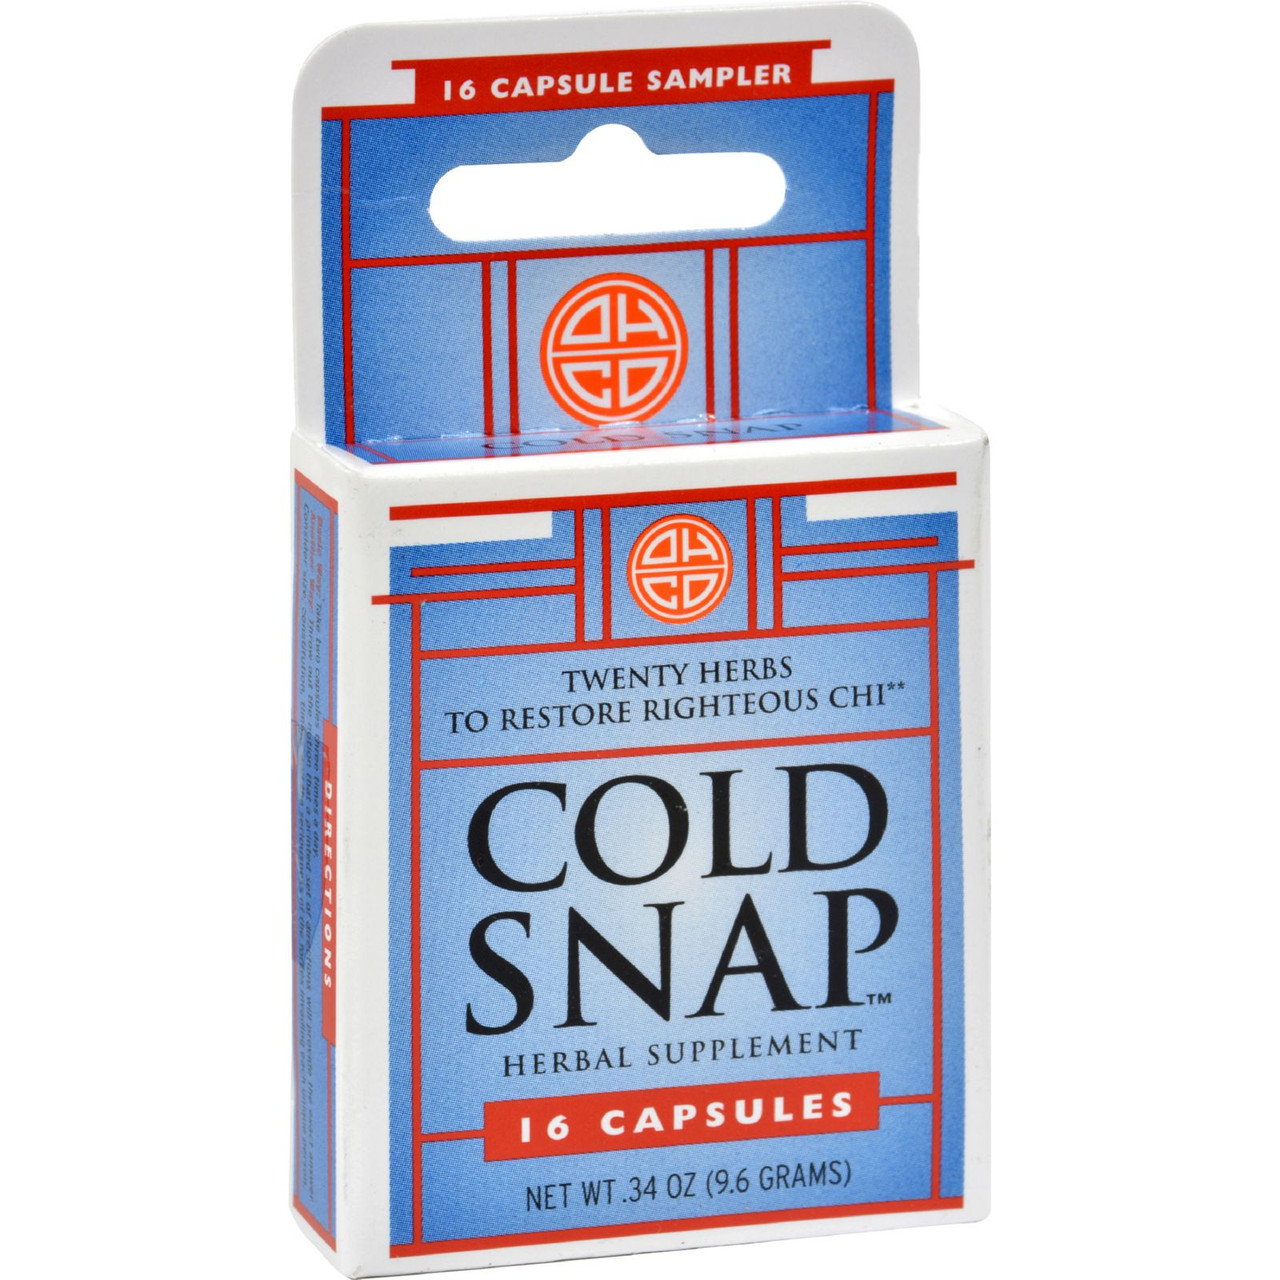 Ohco Cold Snap Sampler (1 Each), Vitamins Supplements, Cold & Flu Care,  791572600162, AY82009